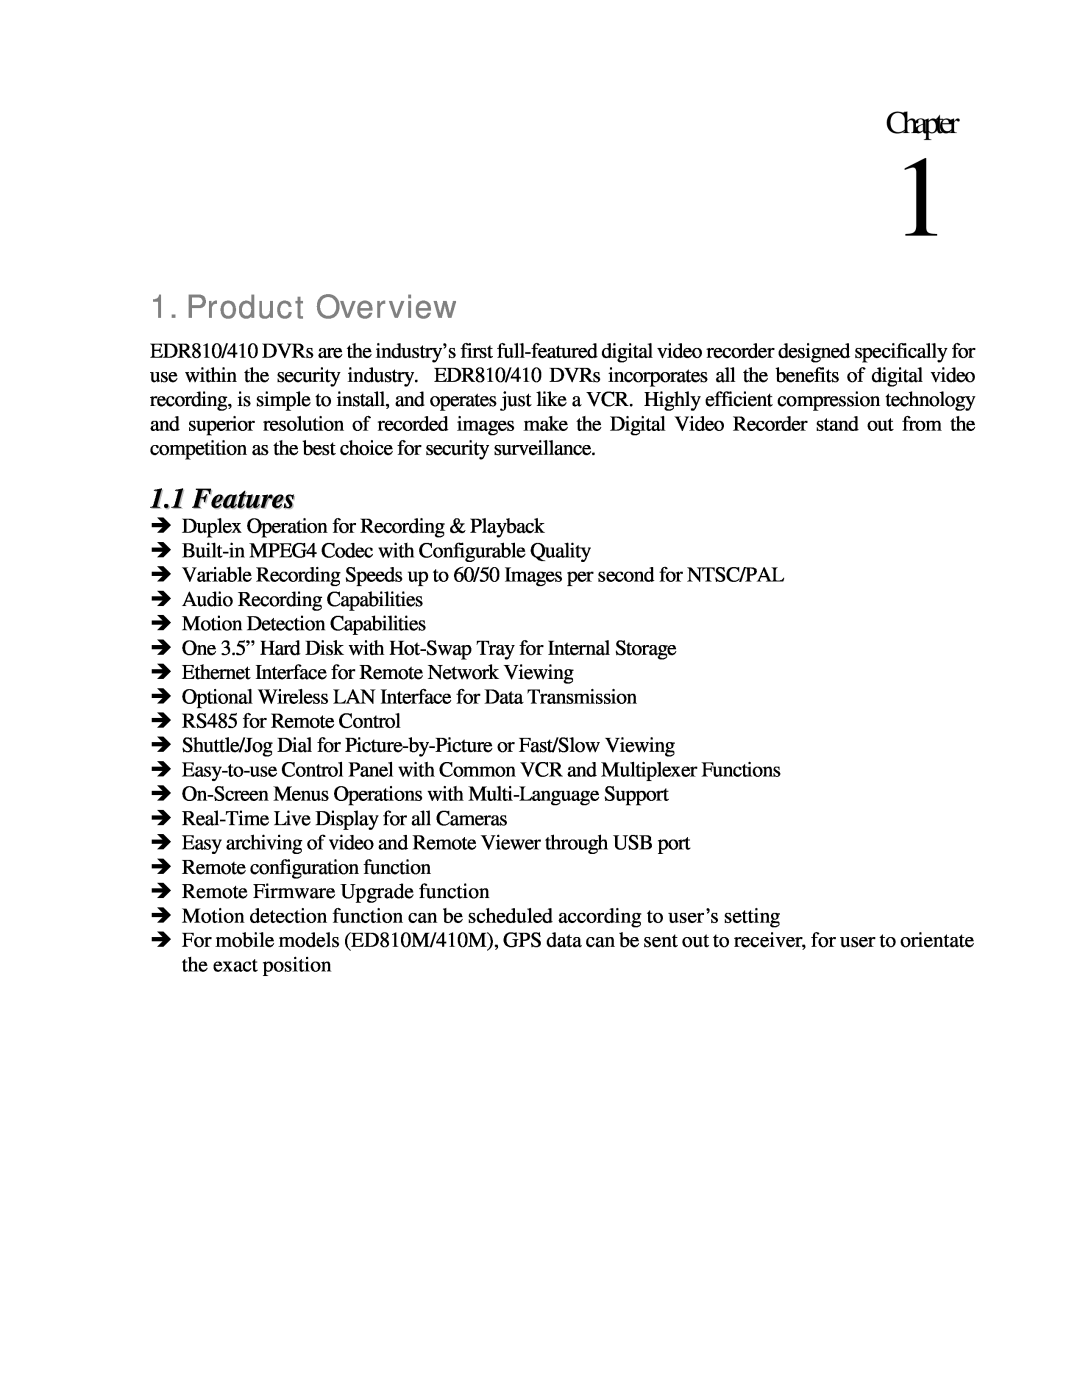 EverFocus EDR410M, EDR810H, EDR410H, EDR810M instruction manual Chapter, Product Overview, Features 